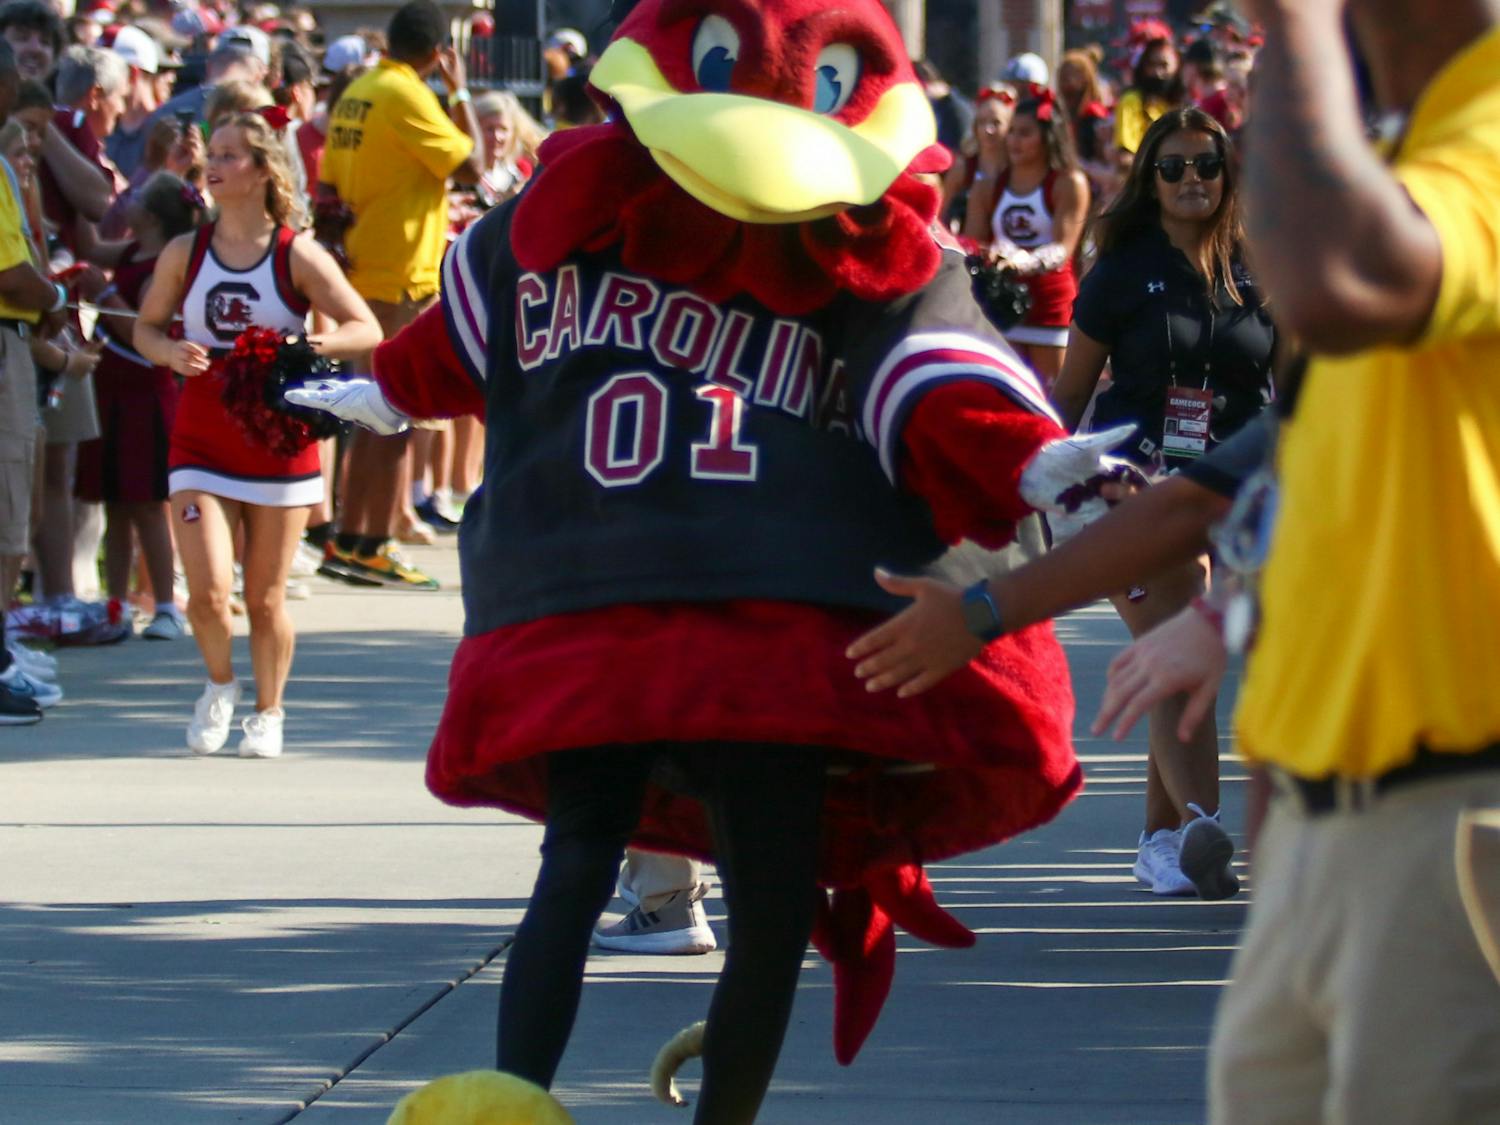 Cocky greeting fans at the Gamecock Walk before the start of the game between the Gamecocks and the Georgia Bulldogs on Sept. 17, 2022. His feathers stand up on the top of his head, notably different from the full head of hair seen on his original suit in the 1980s.